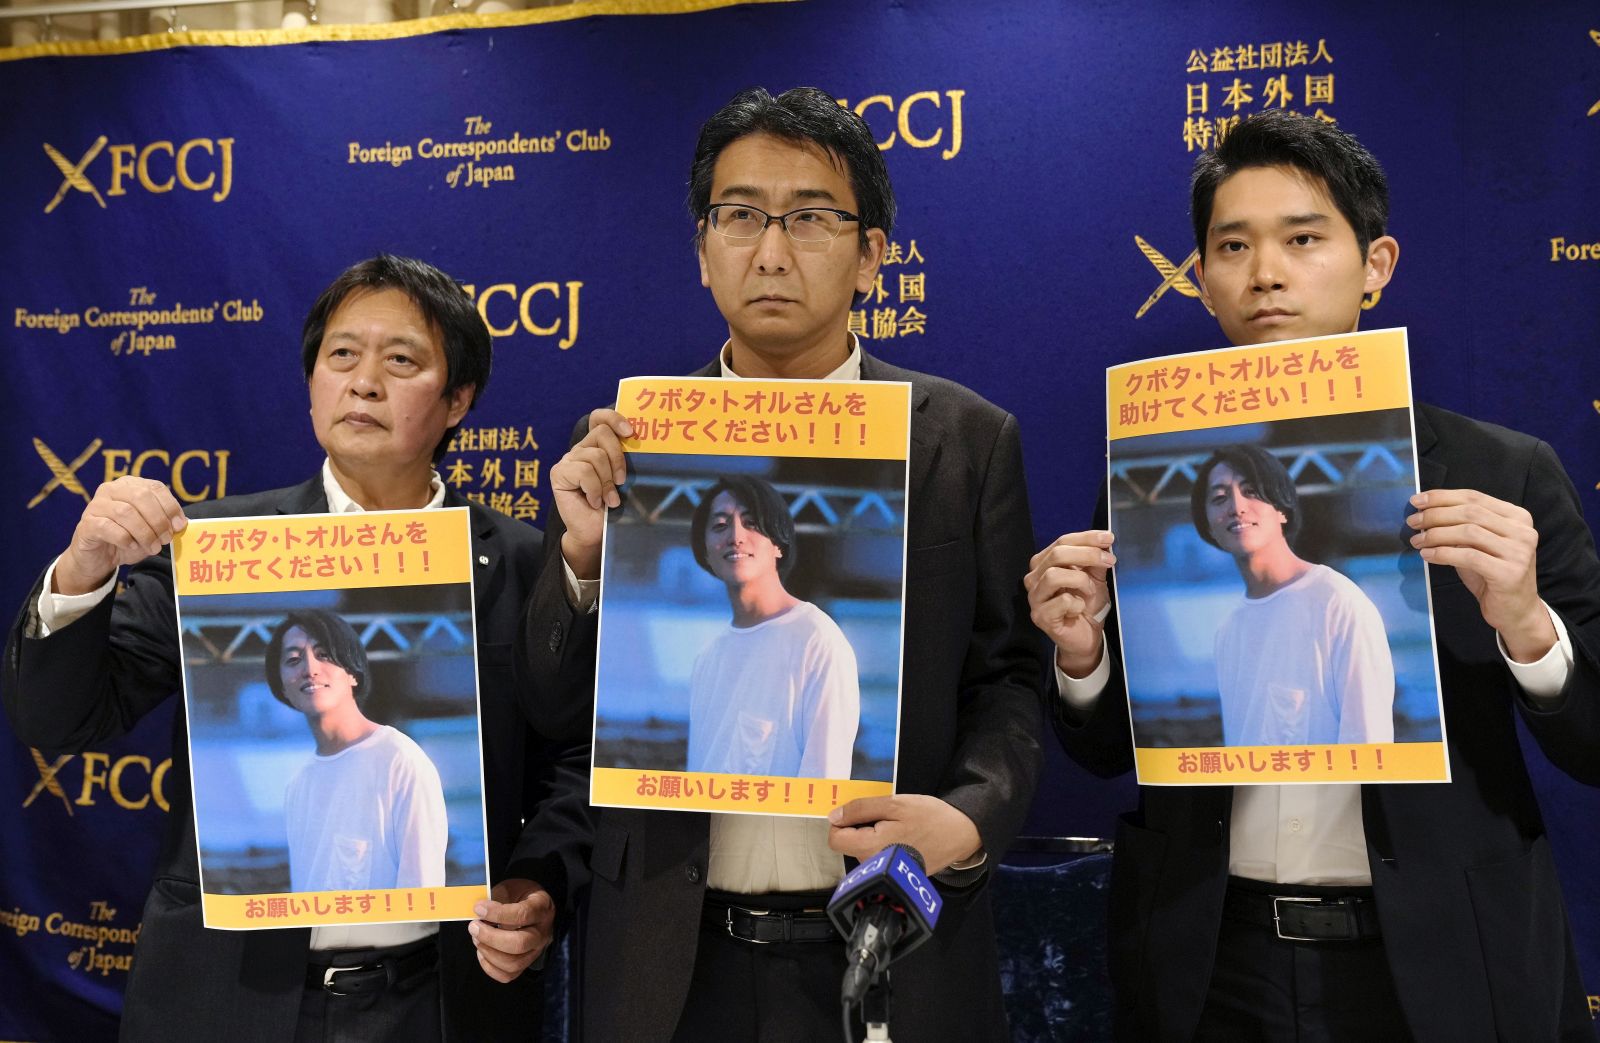 epa10266414 Japanese journalist Yuki Kitazumi (C); Teppei Kasai (R), program officer of Human Rights Watch Asia Division and Myint Swe (L), President of Federation of Workers' Union of Burmese Citizen in Japan, show portraits of Japanese journalist Toru Kubota, who was detained in Myanmar on this July, to appeal for the release of Kubota, at the Foreign Correspondents' Club of Japan (FCCJ) in Tokyo, Japan, 26 October 2022. Kubota was detained on 30 July 2022 in Myanmar while he was filming a demonstration against the government in Yangon. Kubota was sentenced three years in prison for violating an immigration law and additional time for other charges in total of 10 years in prison, by a court in Myanmar. Kitazumi is a freelance journalist who was detained in 2021 in Myanmar, interrogated for spreading 'fake news' but freed after a month.  EPA/KIMIMASA MAYAMA